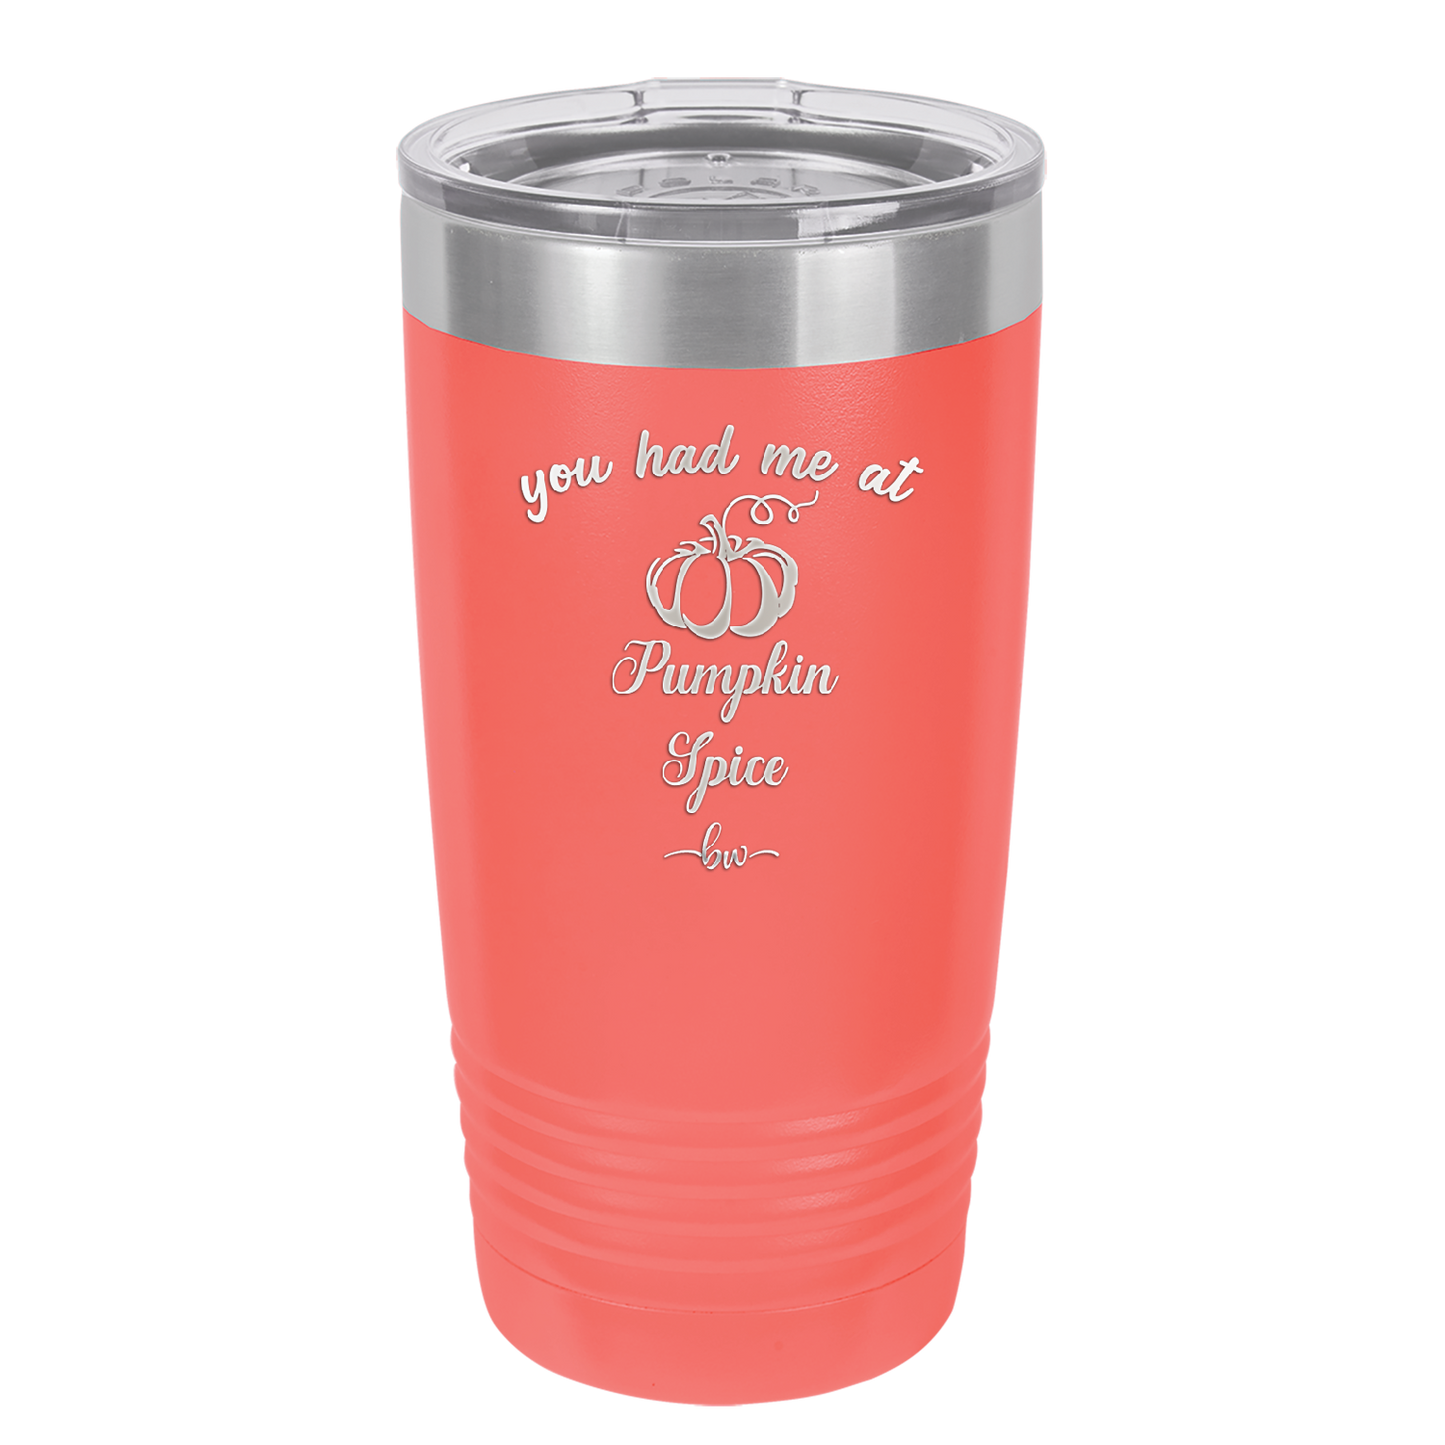 You Had Me at Pumpkin Spice - Laser Engraved Stainless Steel Drinkware - 1211 -